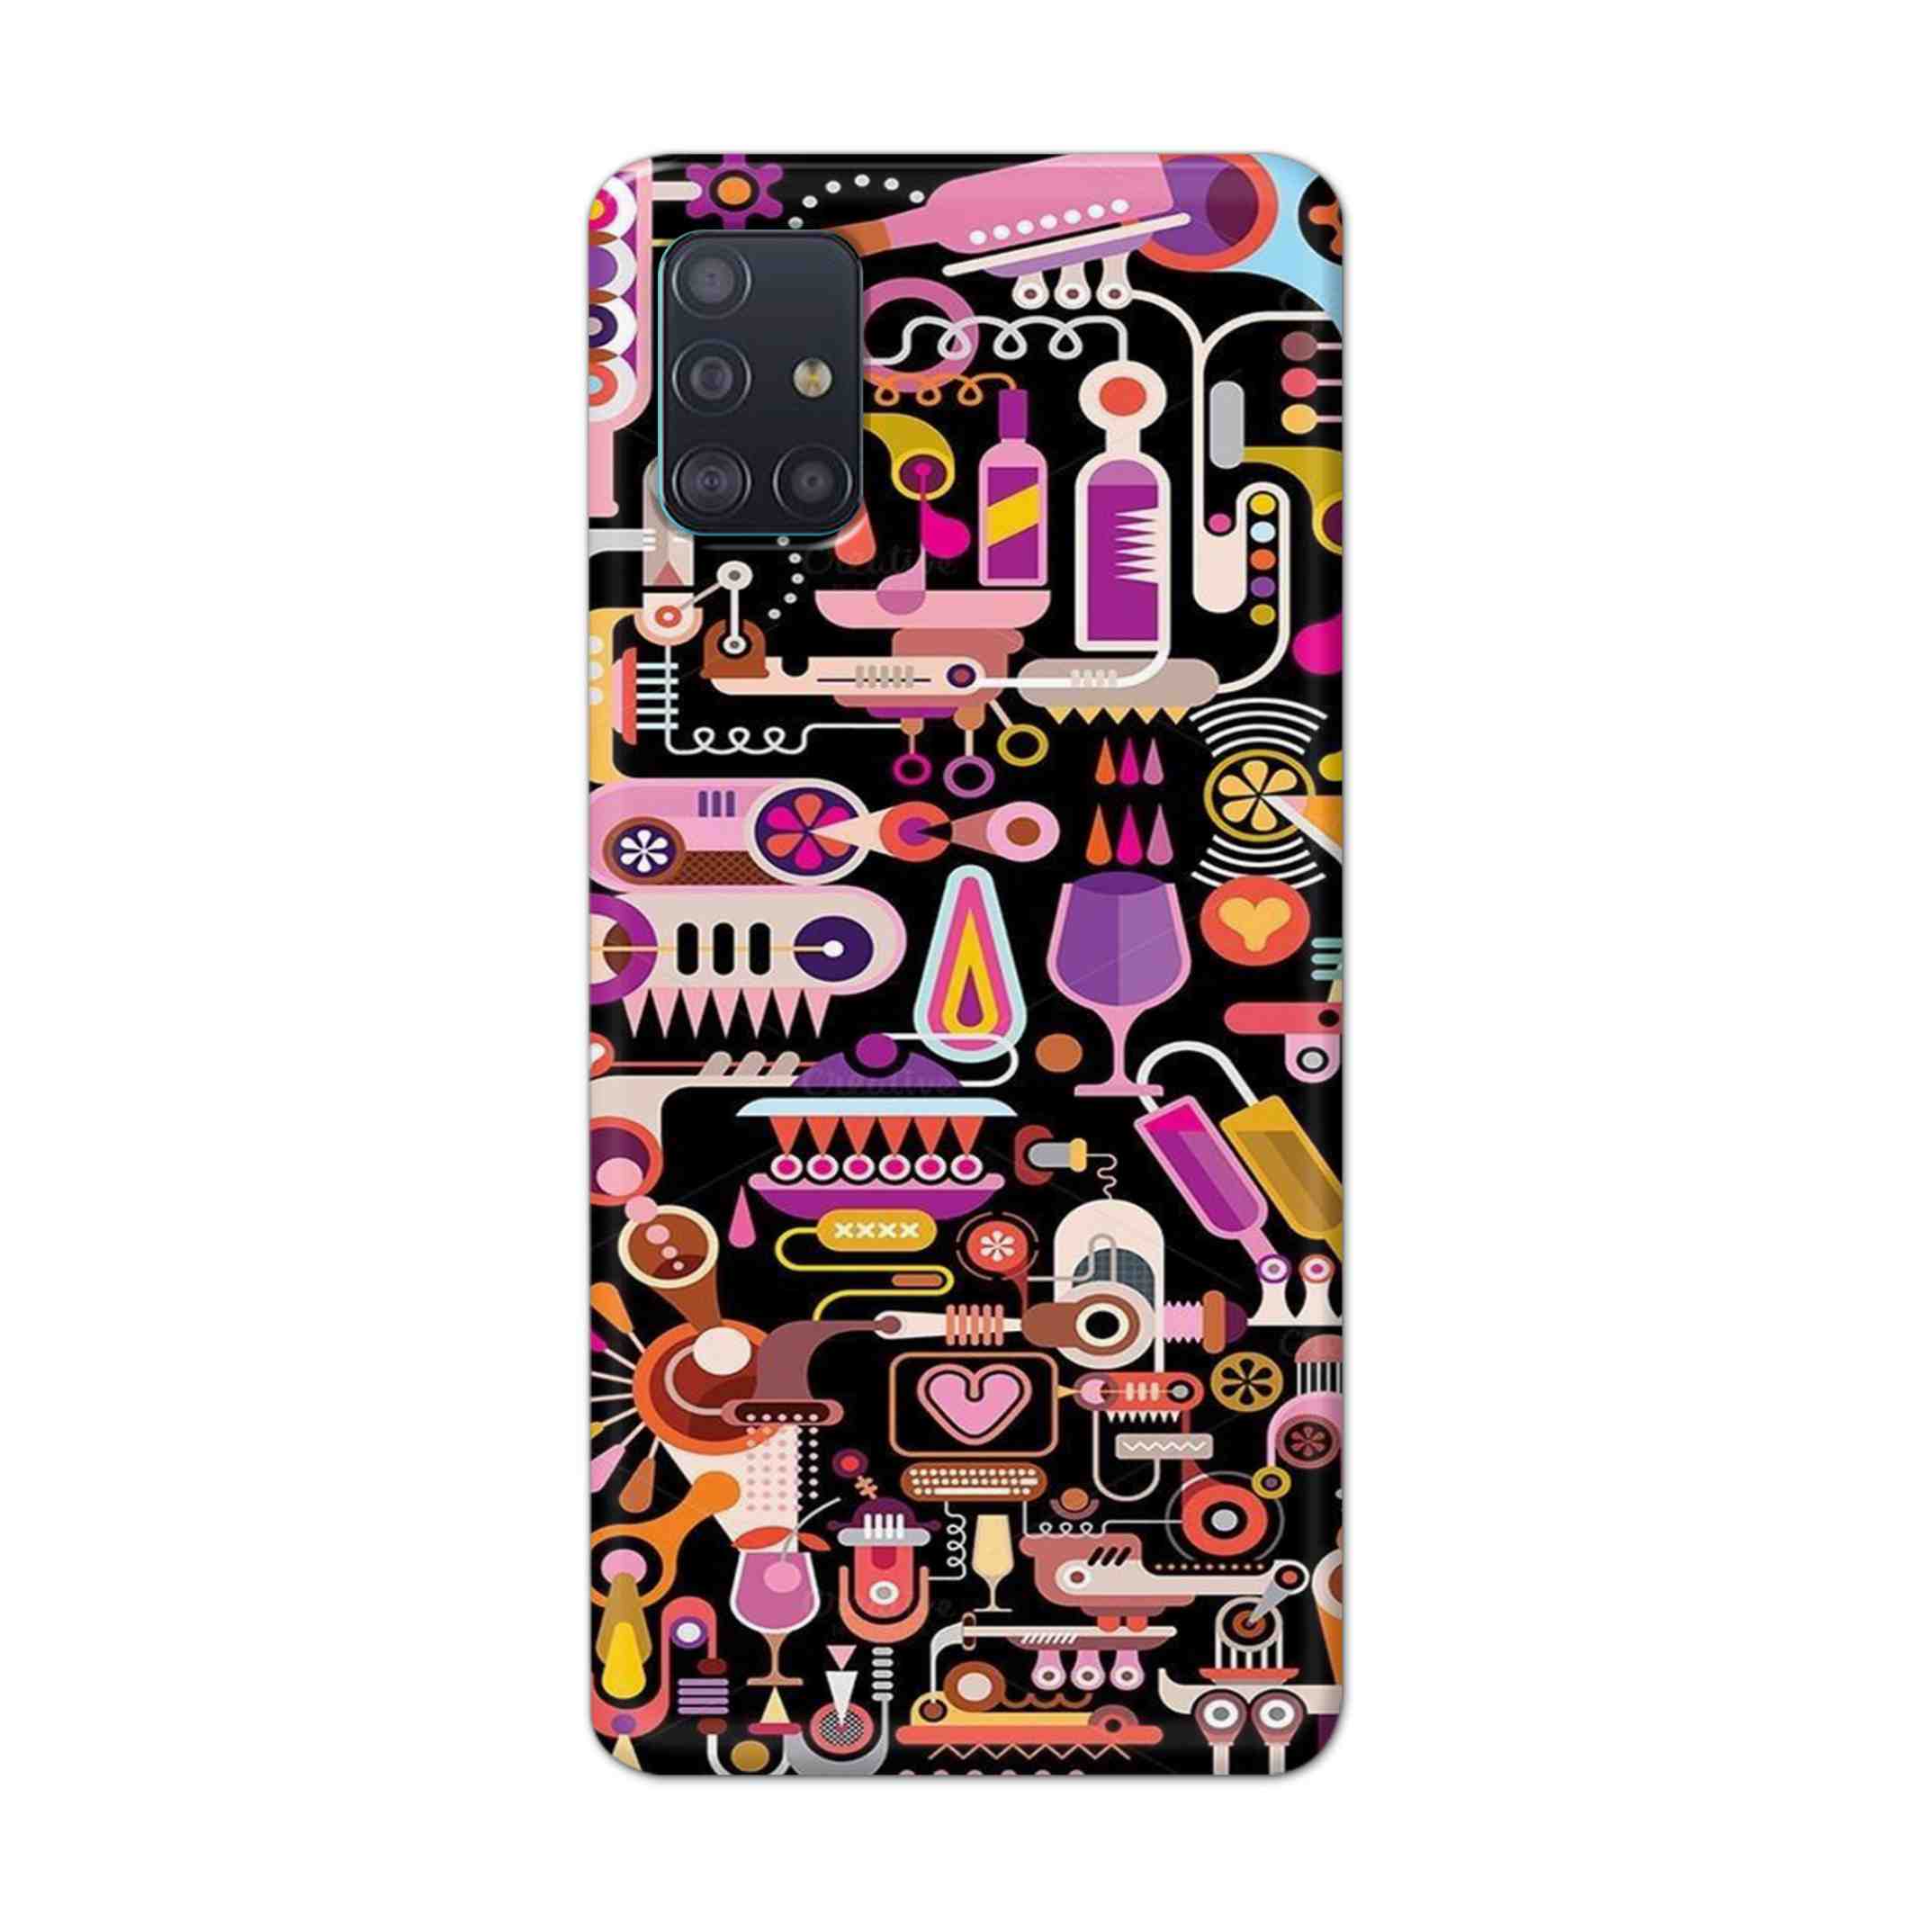 Buy Lab Art Hard Back Mobile Phone Case Cover For Samsung Galaxy A71 Online